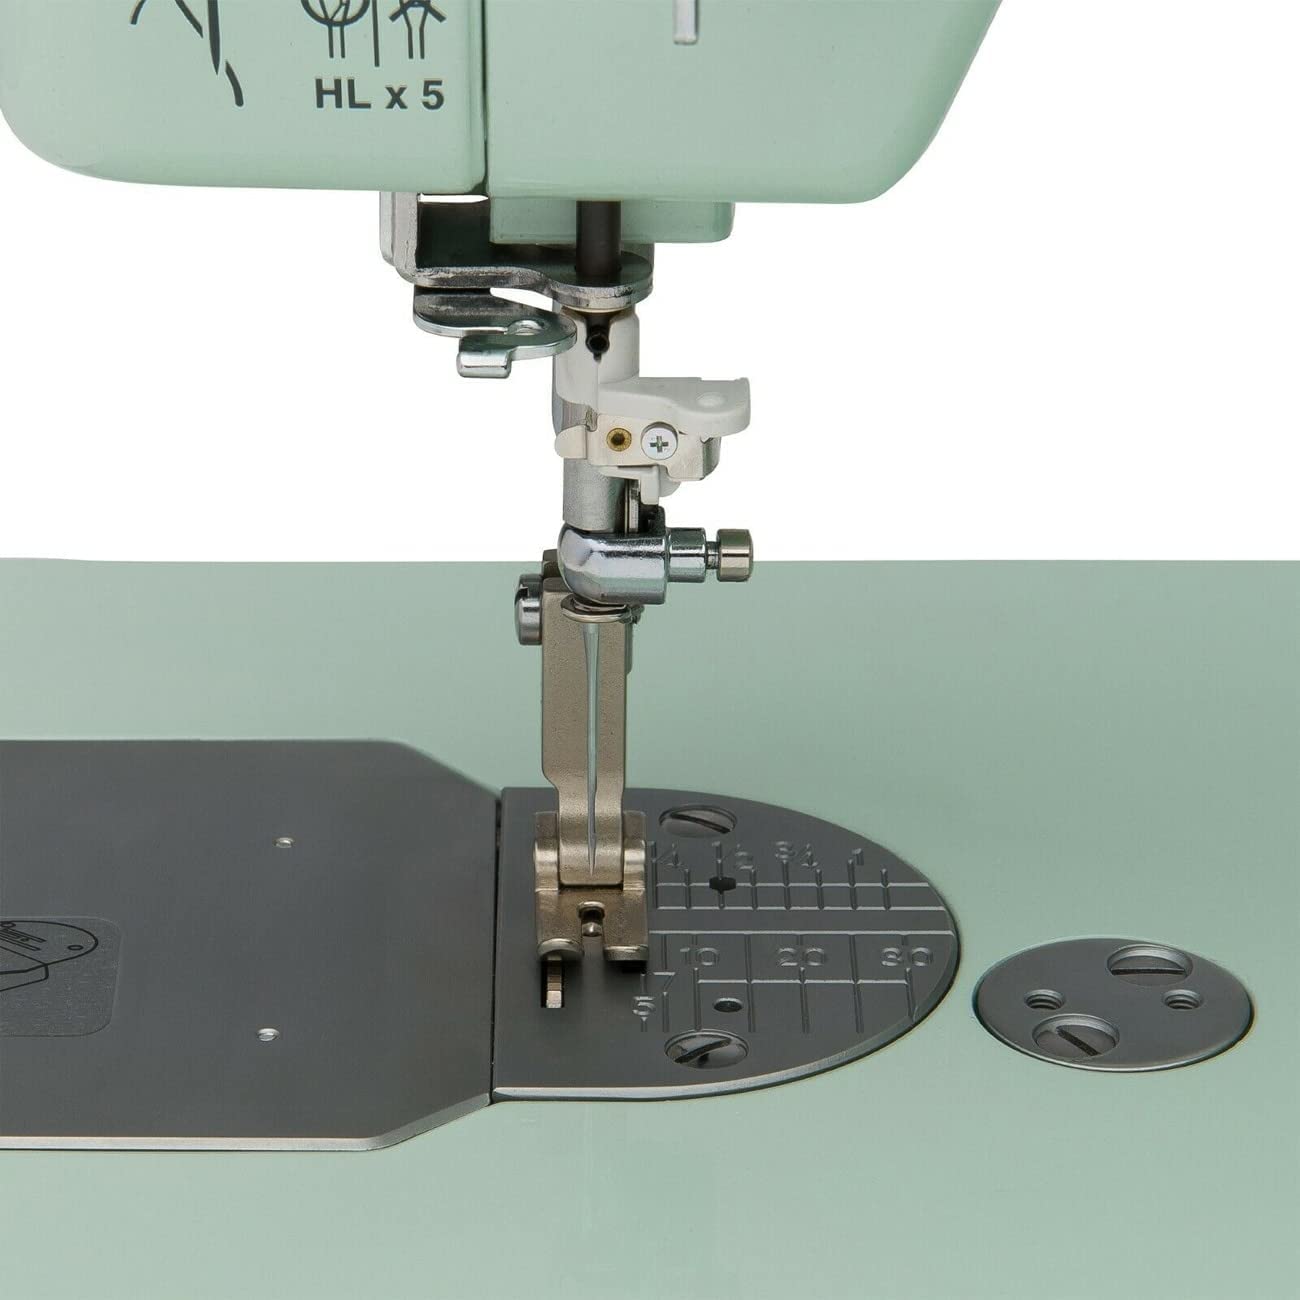 Elna Elnita EF1 Sewing and Quilting Machine for Sale at World Weidner